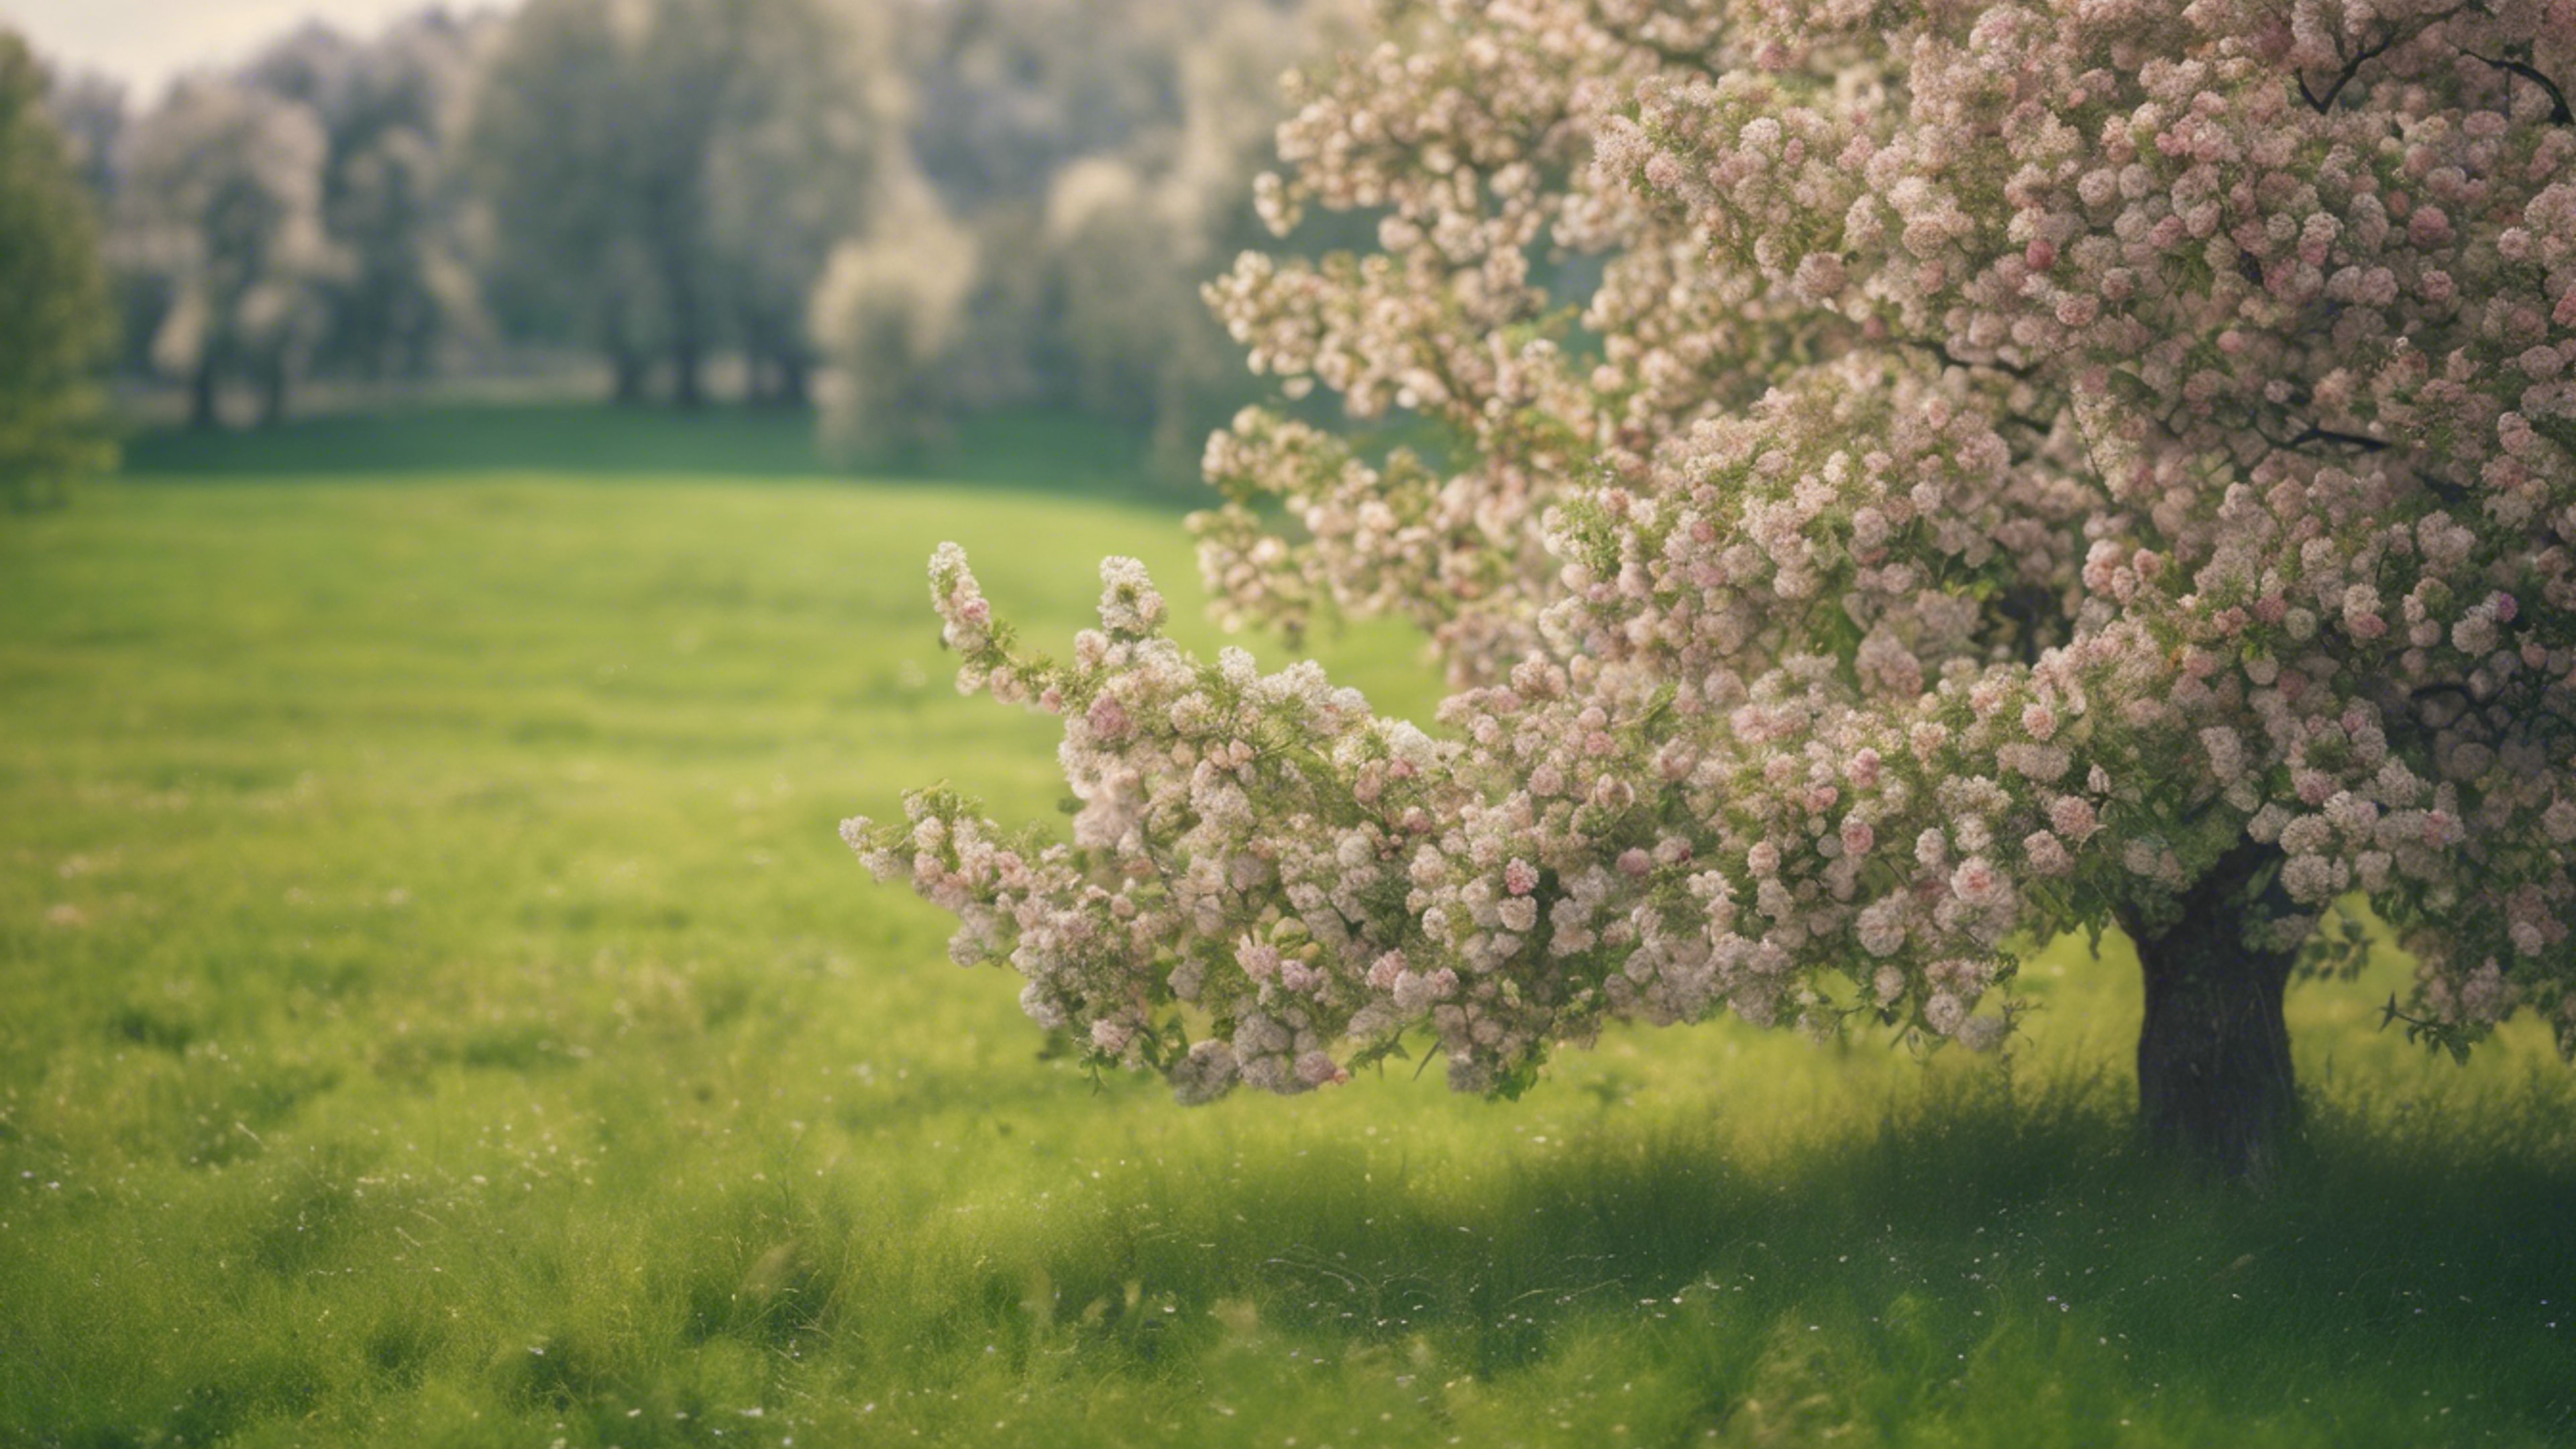 A flowering apple tree standing alone in a green, soft-focused meadow. ورق الجدران[1ff1aa7d7c75473a9031]